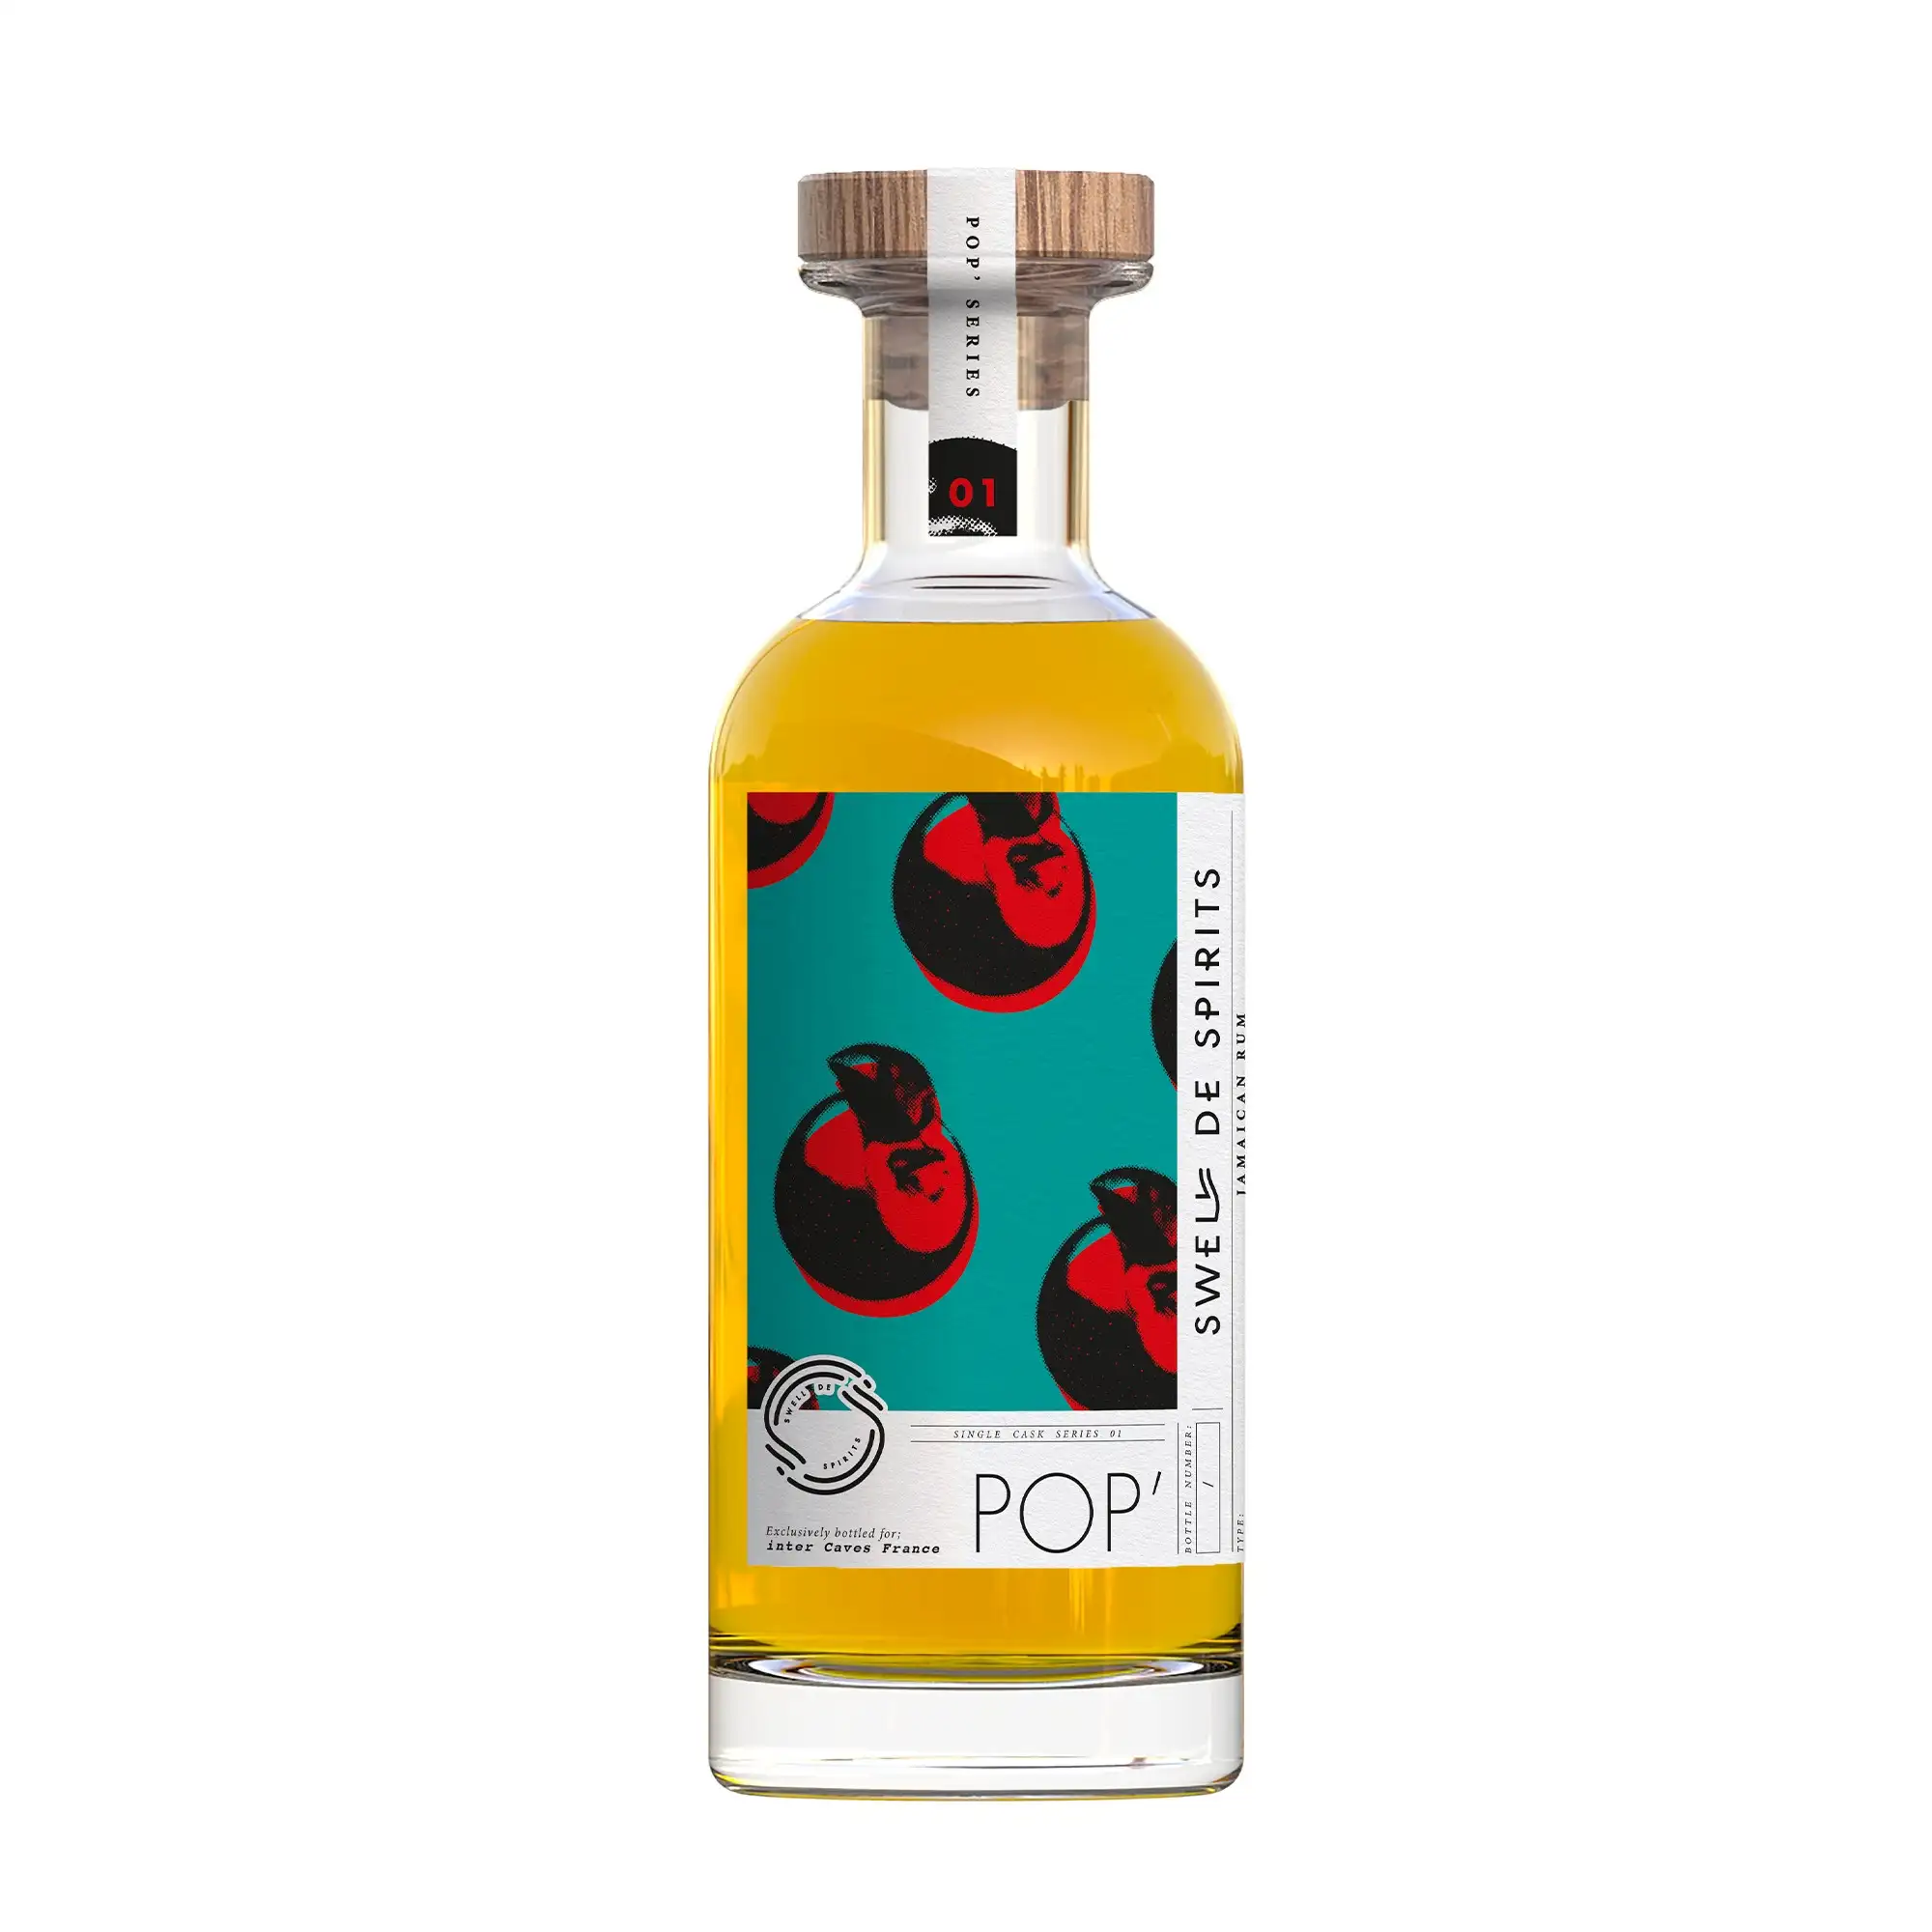 Image of the front of the bottle of the rum POP’ Series N°1 (Inter Caves France)